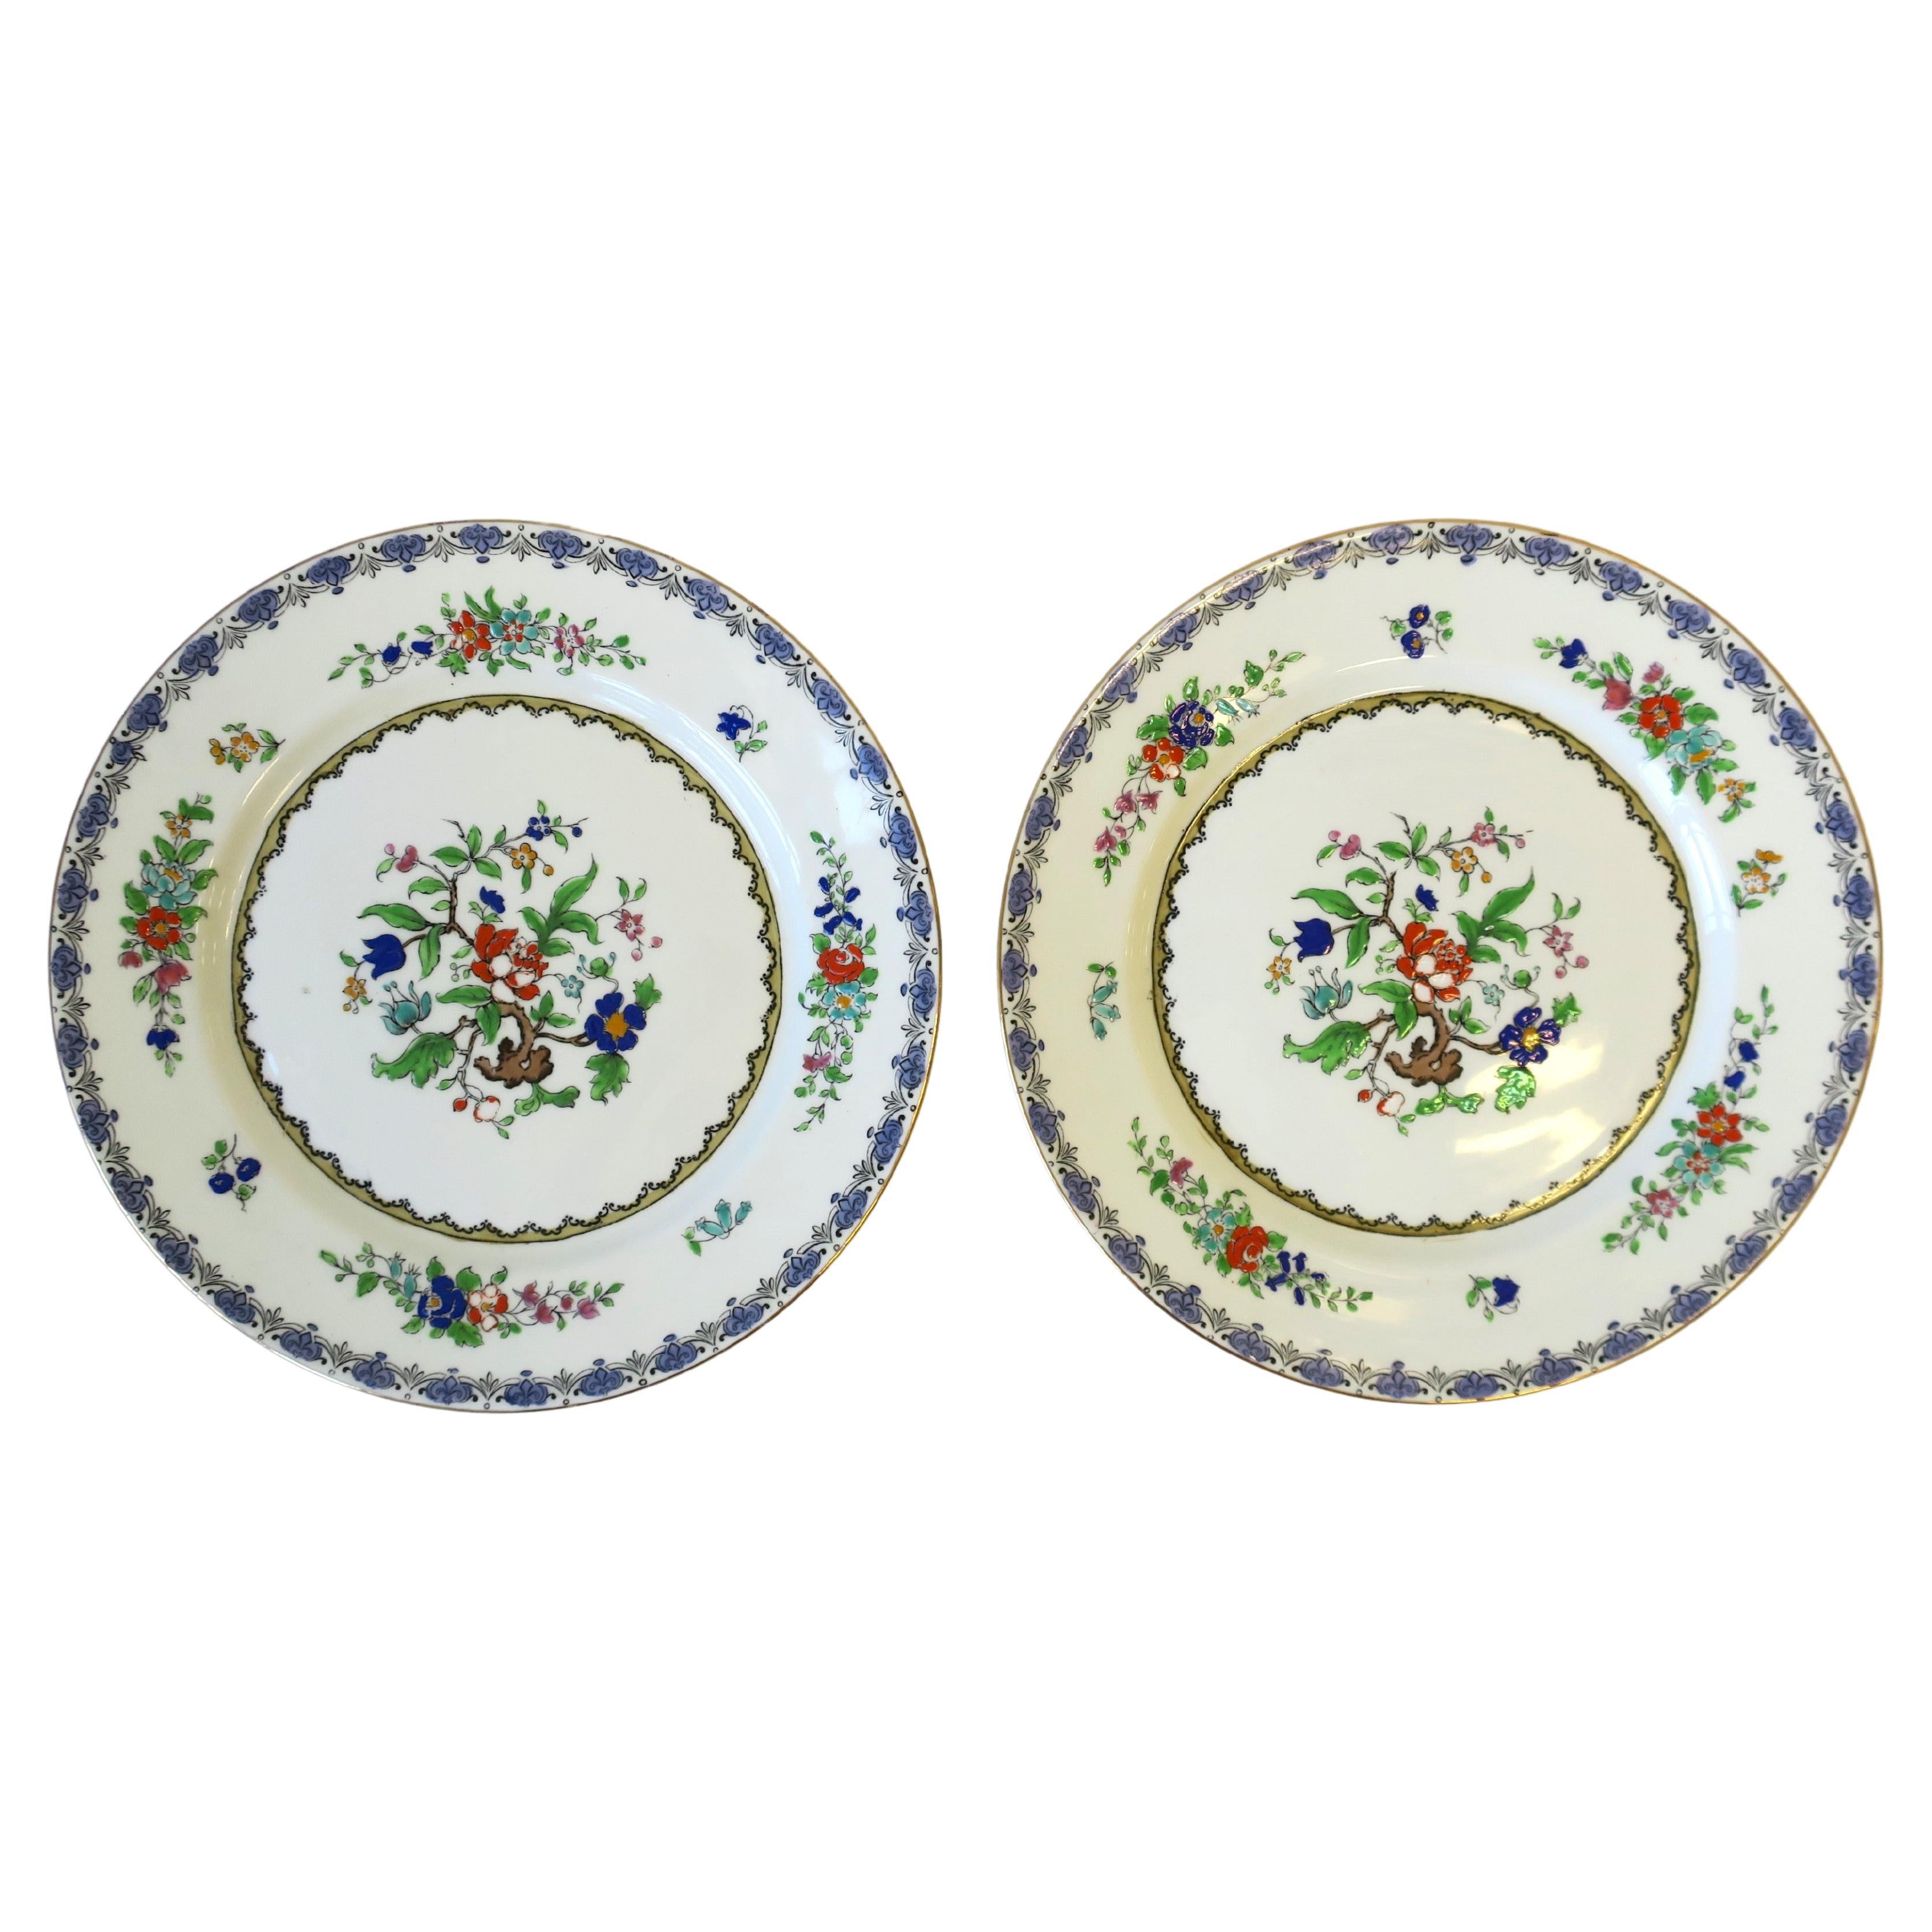 A pair of English fine bone china porcelain plates with a beautiful floral botanical center design, by Adderley Ware, circa early-20th century, England. Plates have a beautiful, raised frieze/relief of flowers and leaves at center and around plates